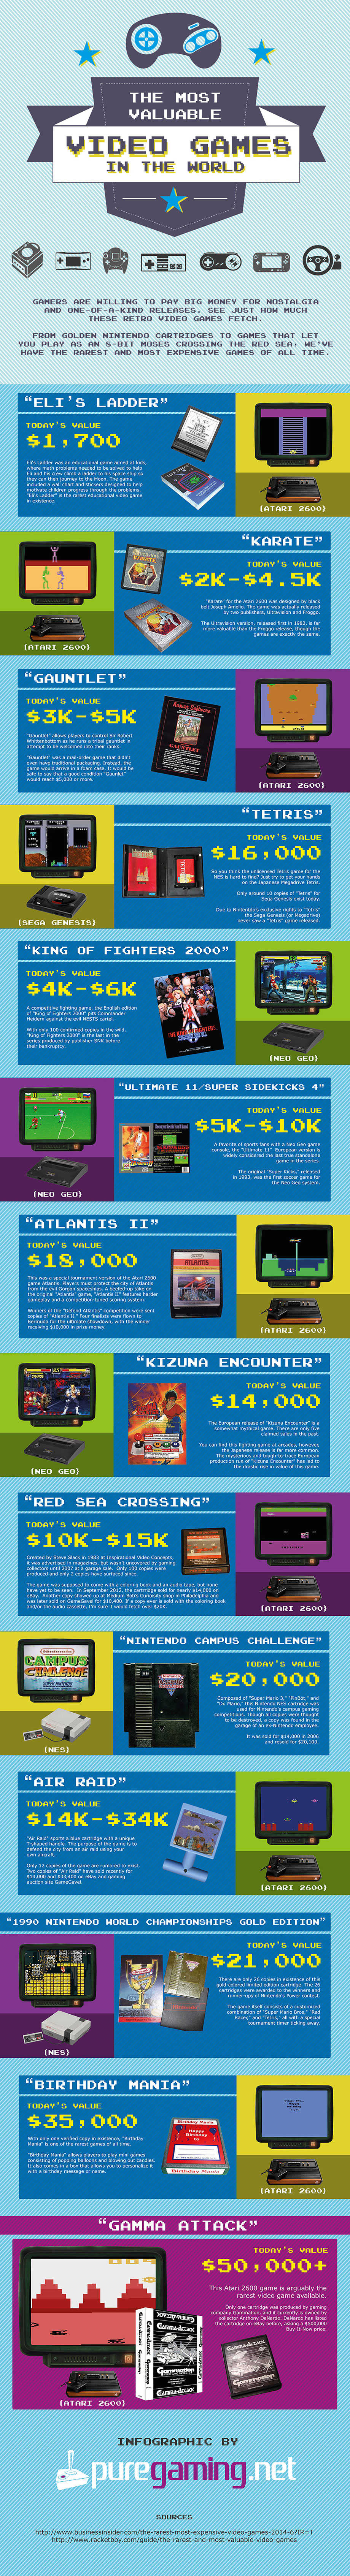 14 Rarest and Most Valuable Video Games in The World (Infographic)